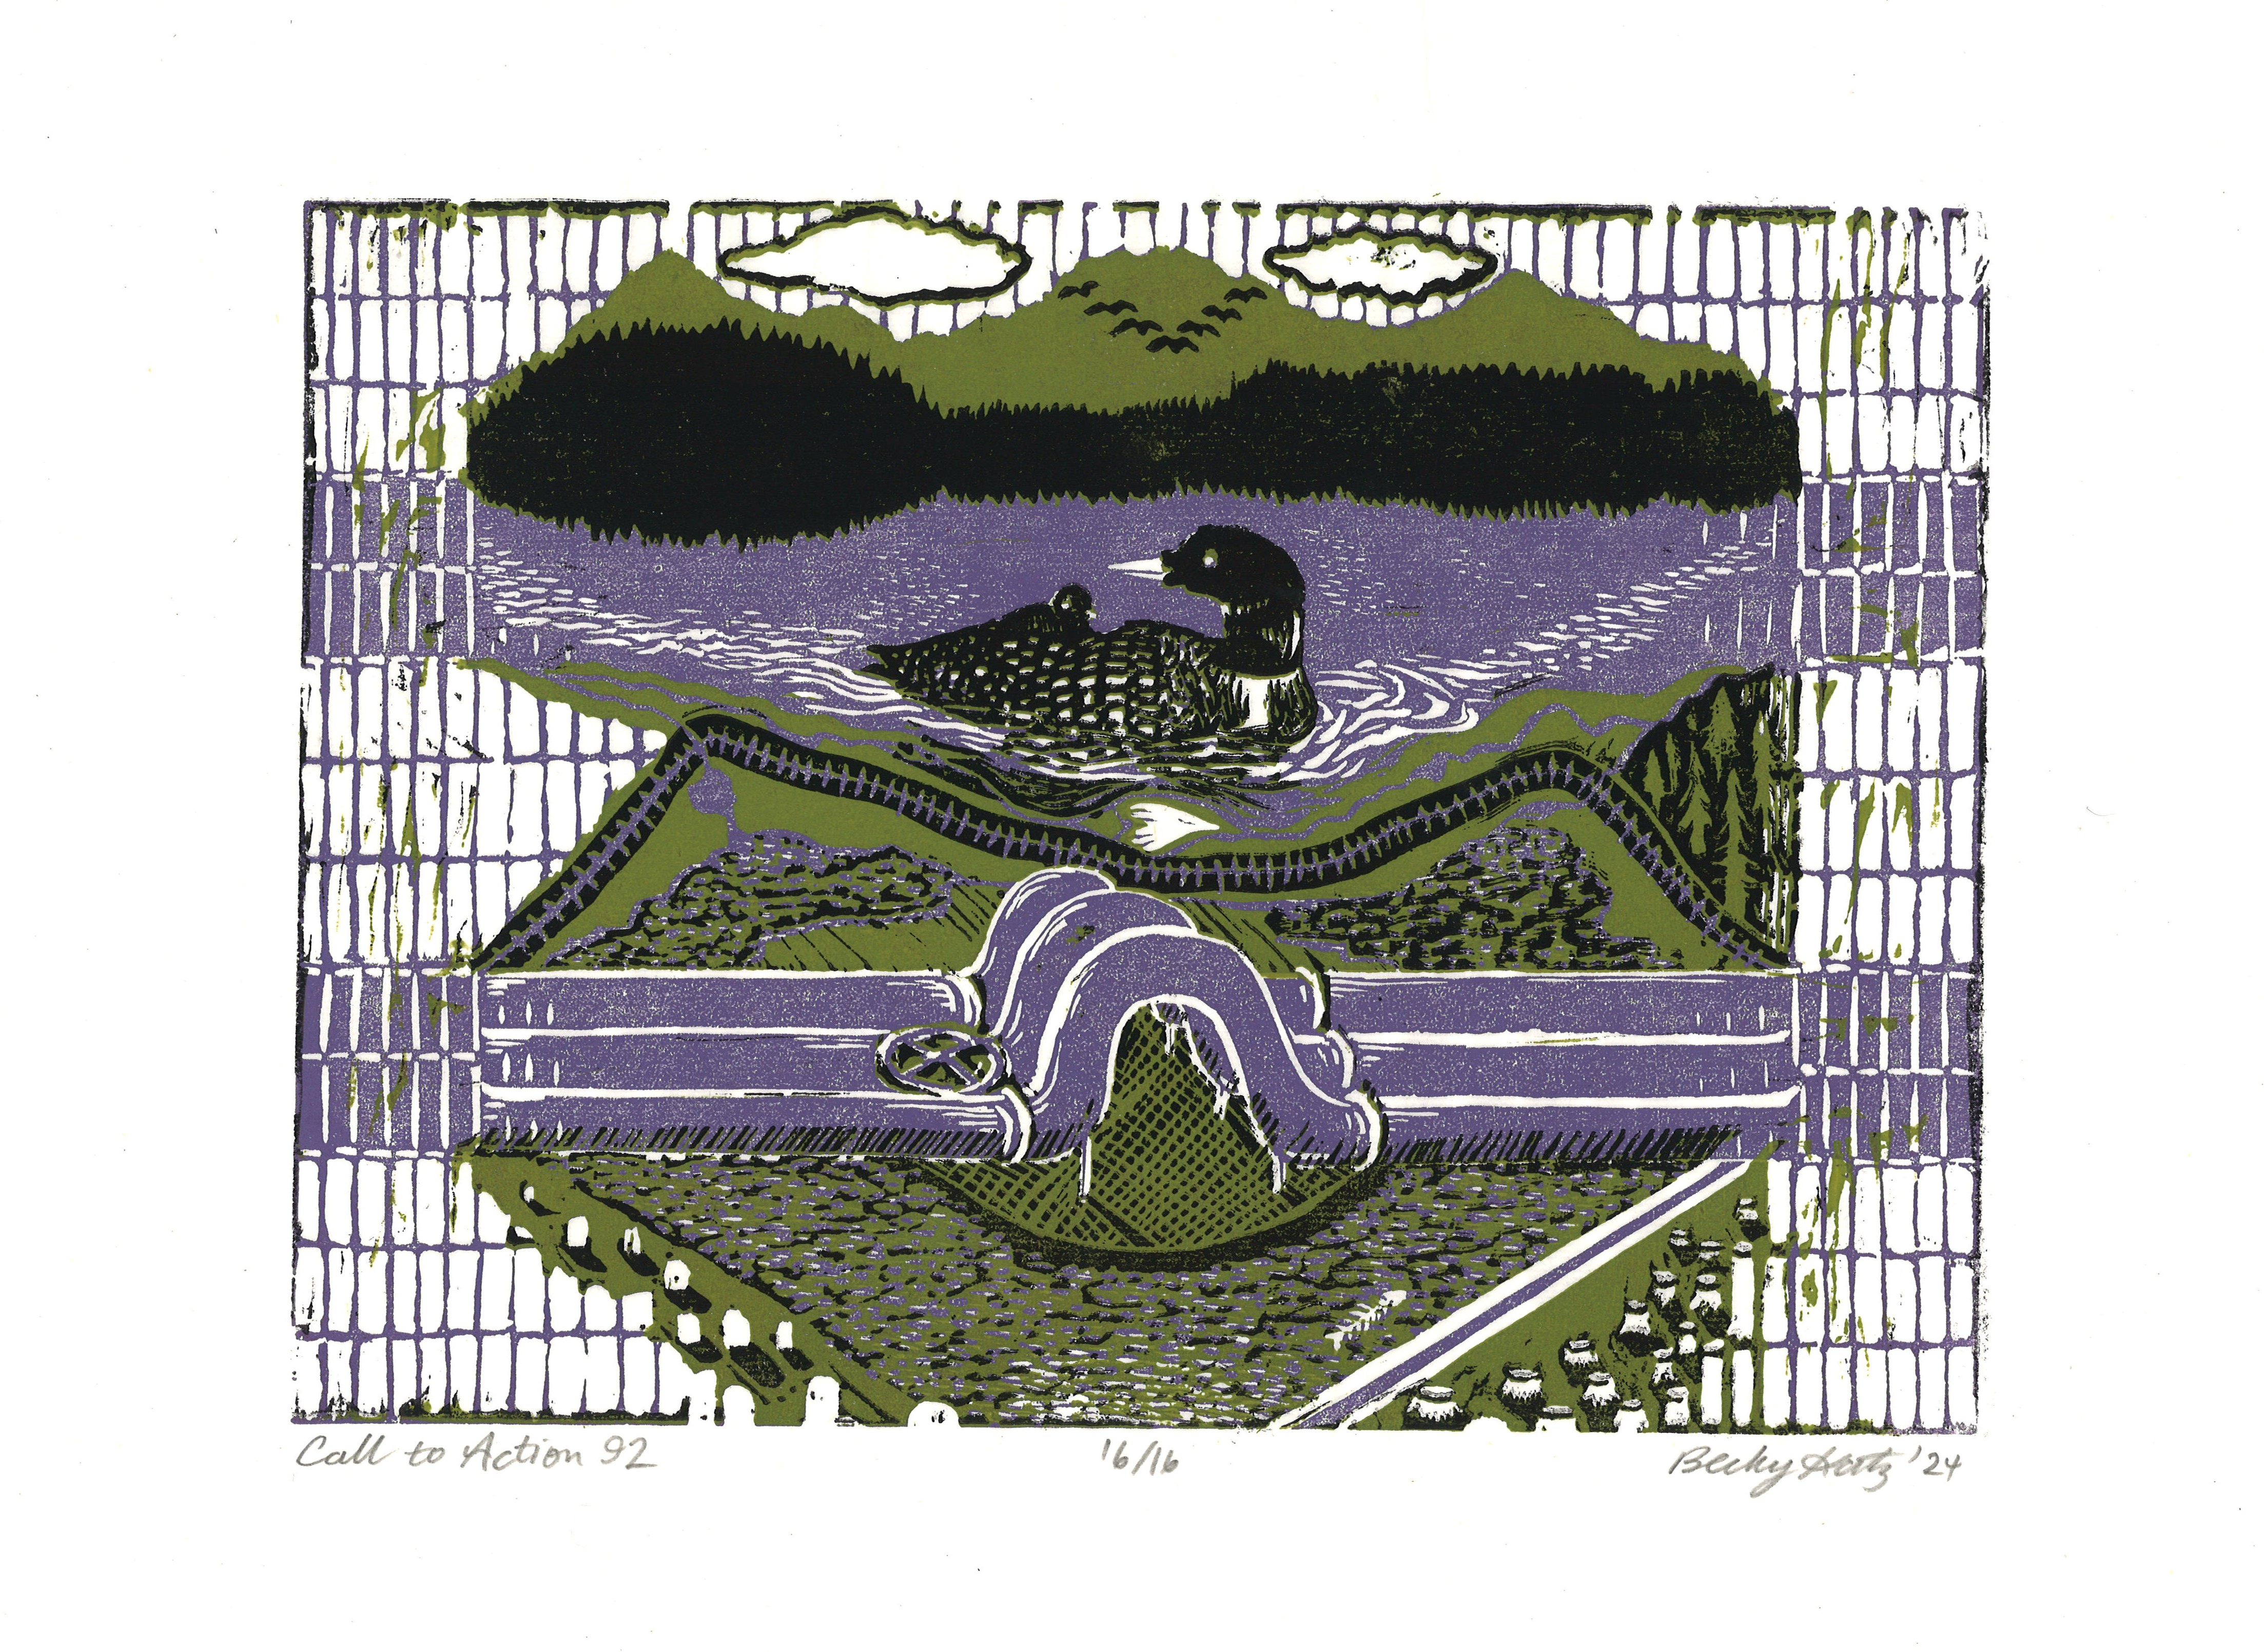 print depicting two row wampum with a natural scene including a loon representing the first row and pipeline and decaying landscape on the second line